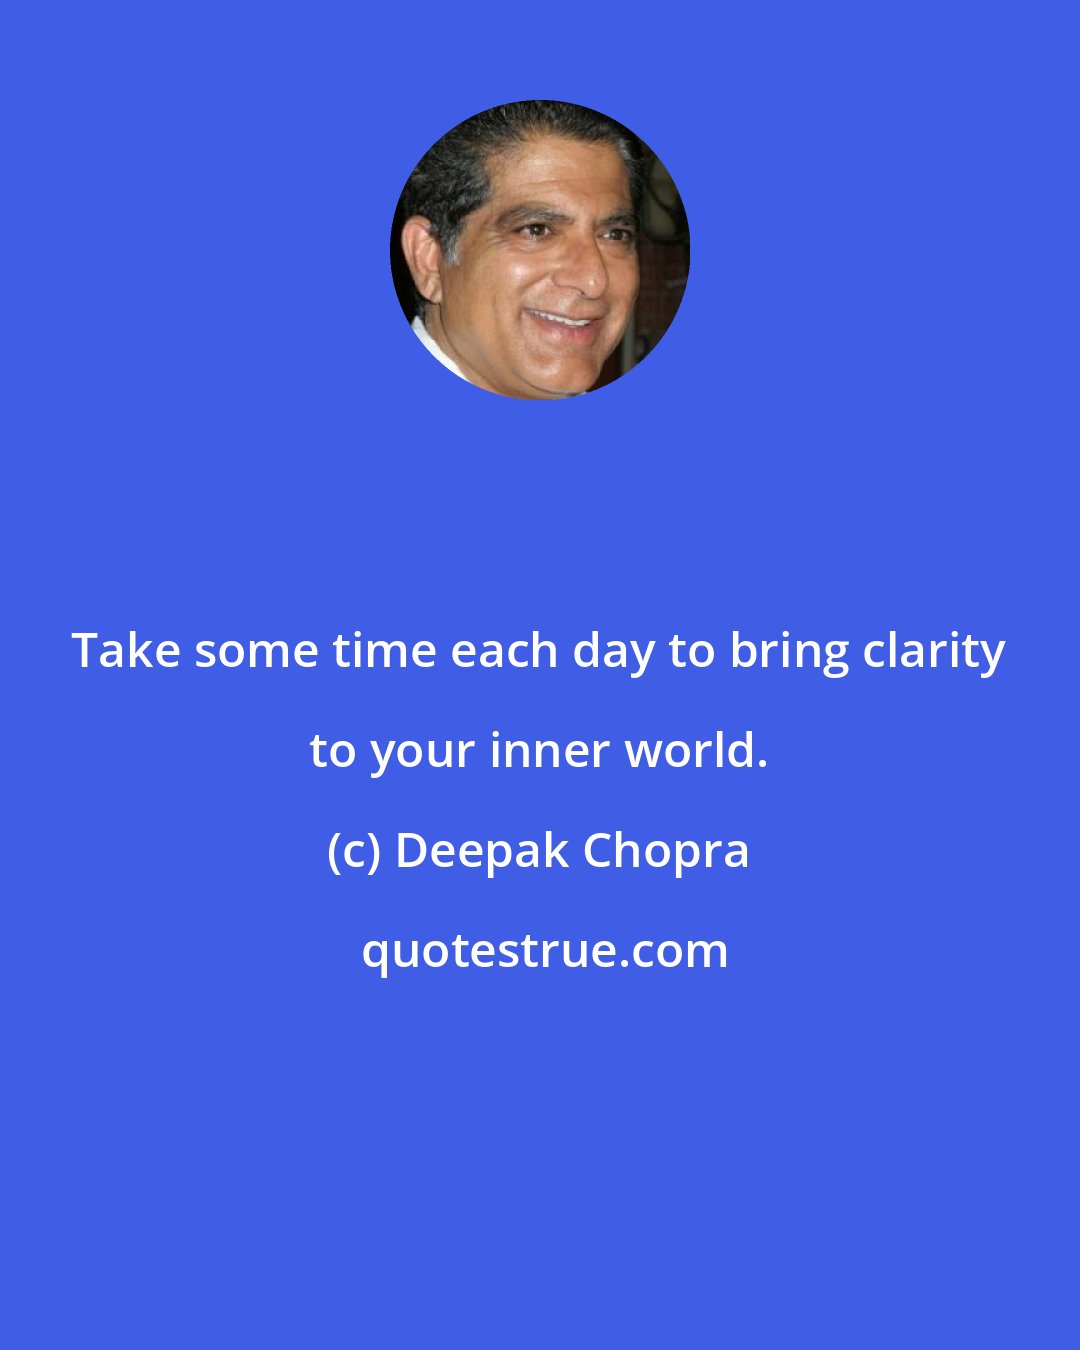 Deepak Chopra: Take some time each day to bring clarity to your inner world.